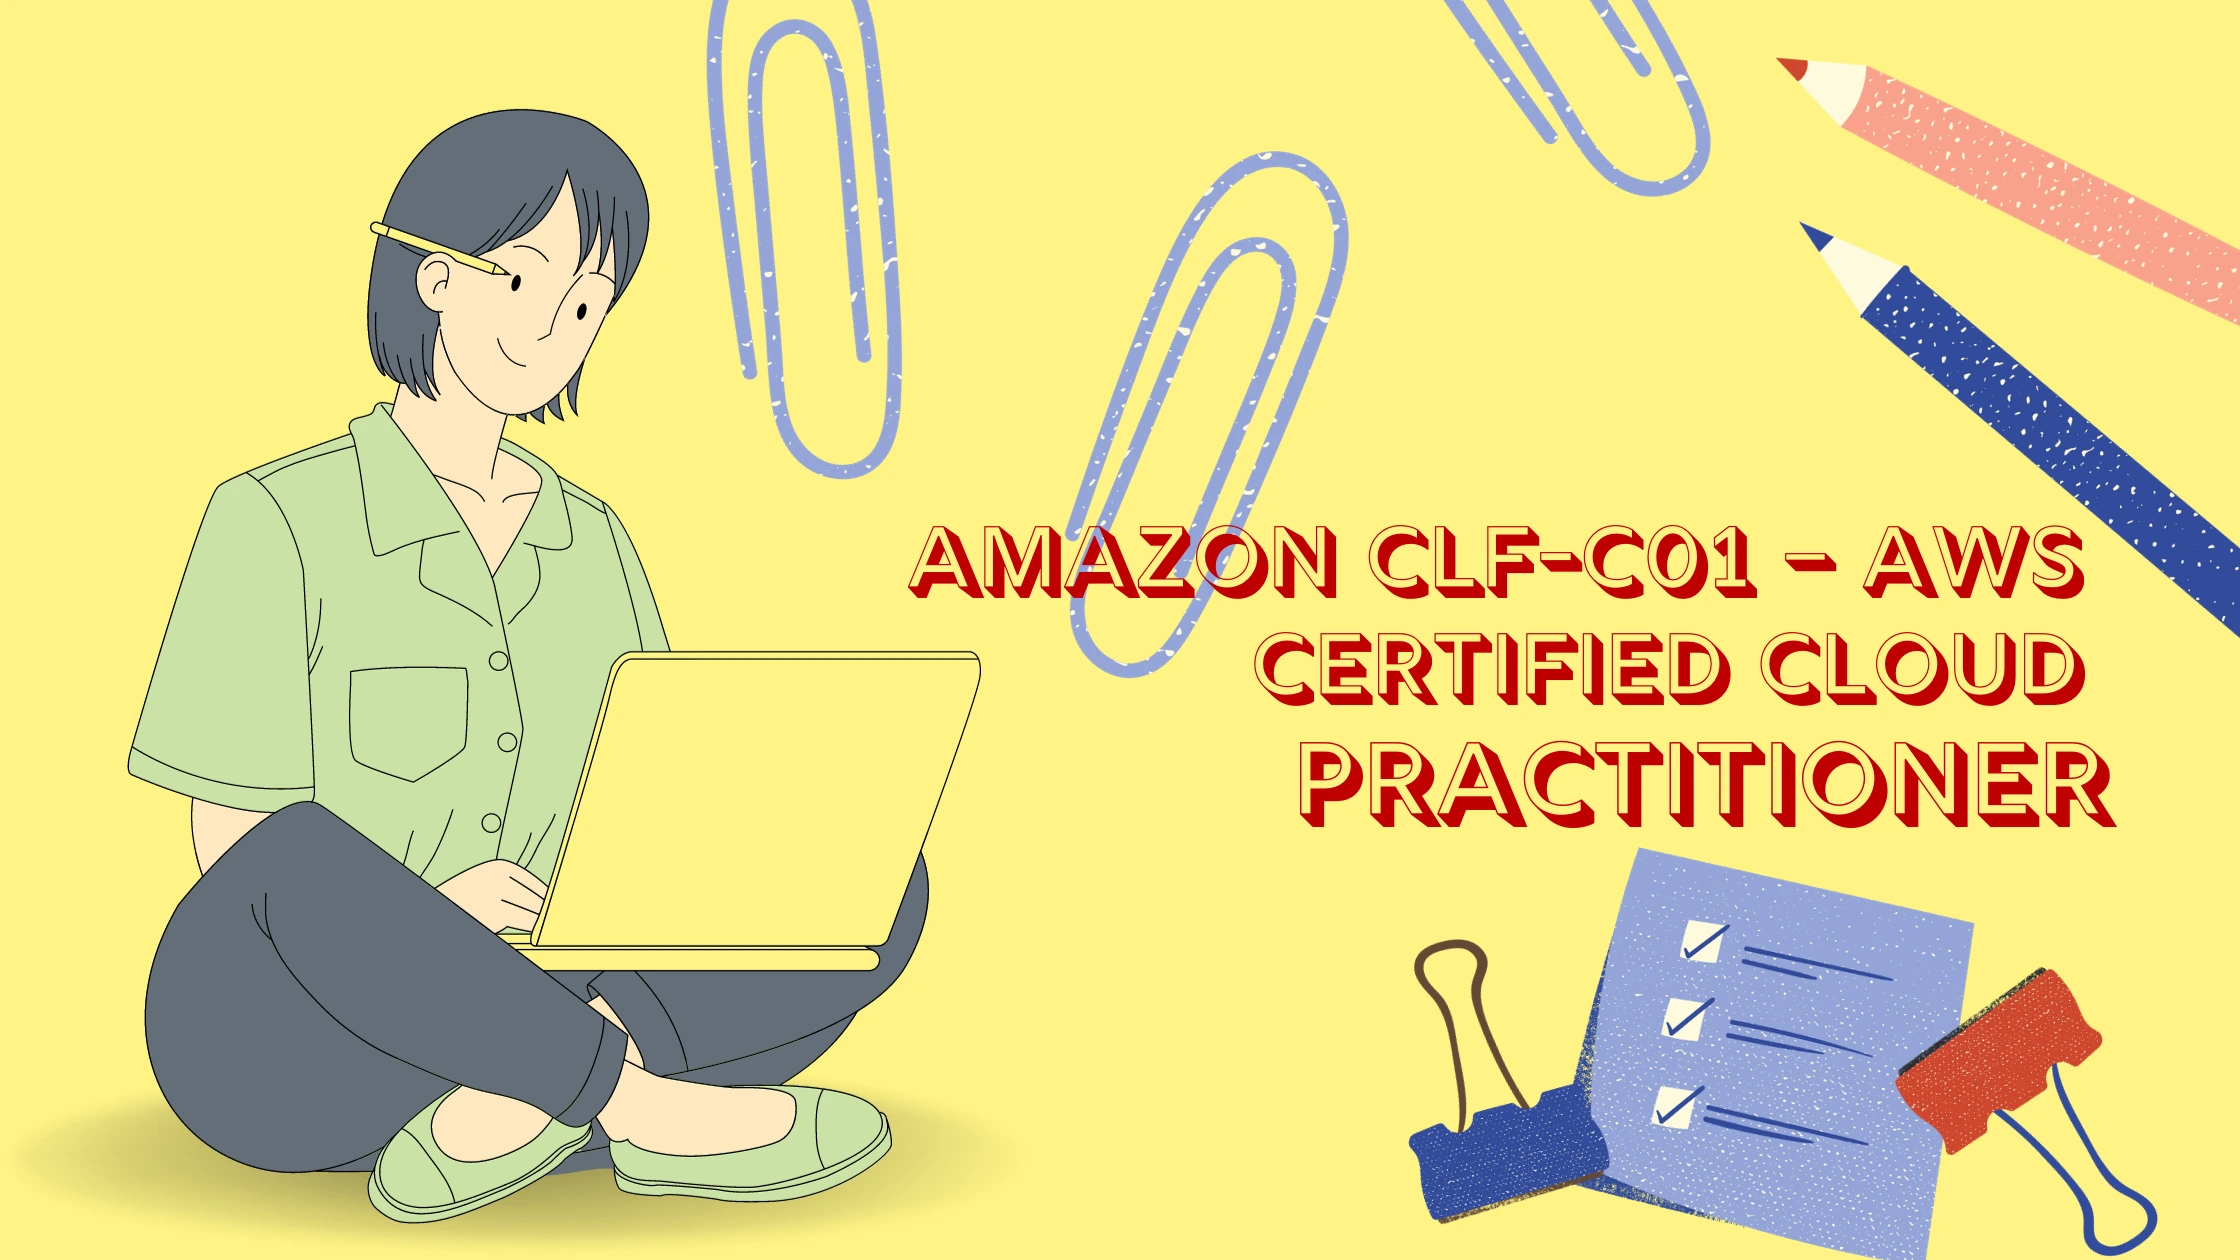 AWS Certified Cloud Practitioner 500 Practice Exam Questions Free Download guarantee success